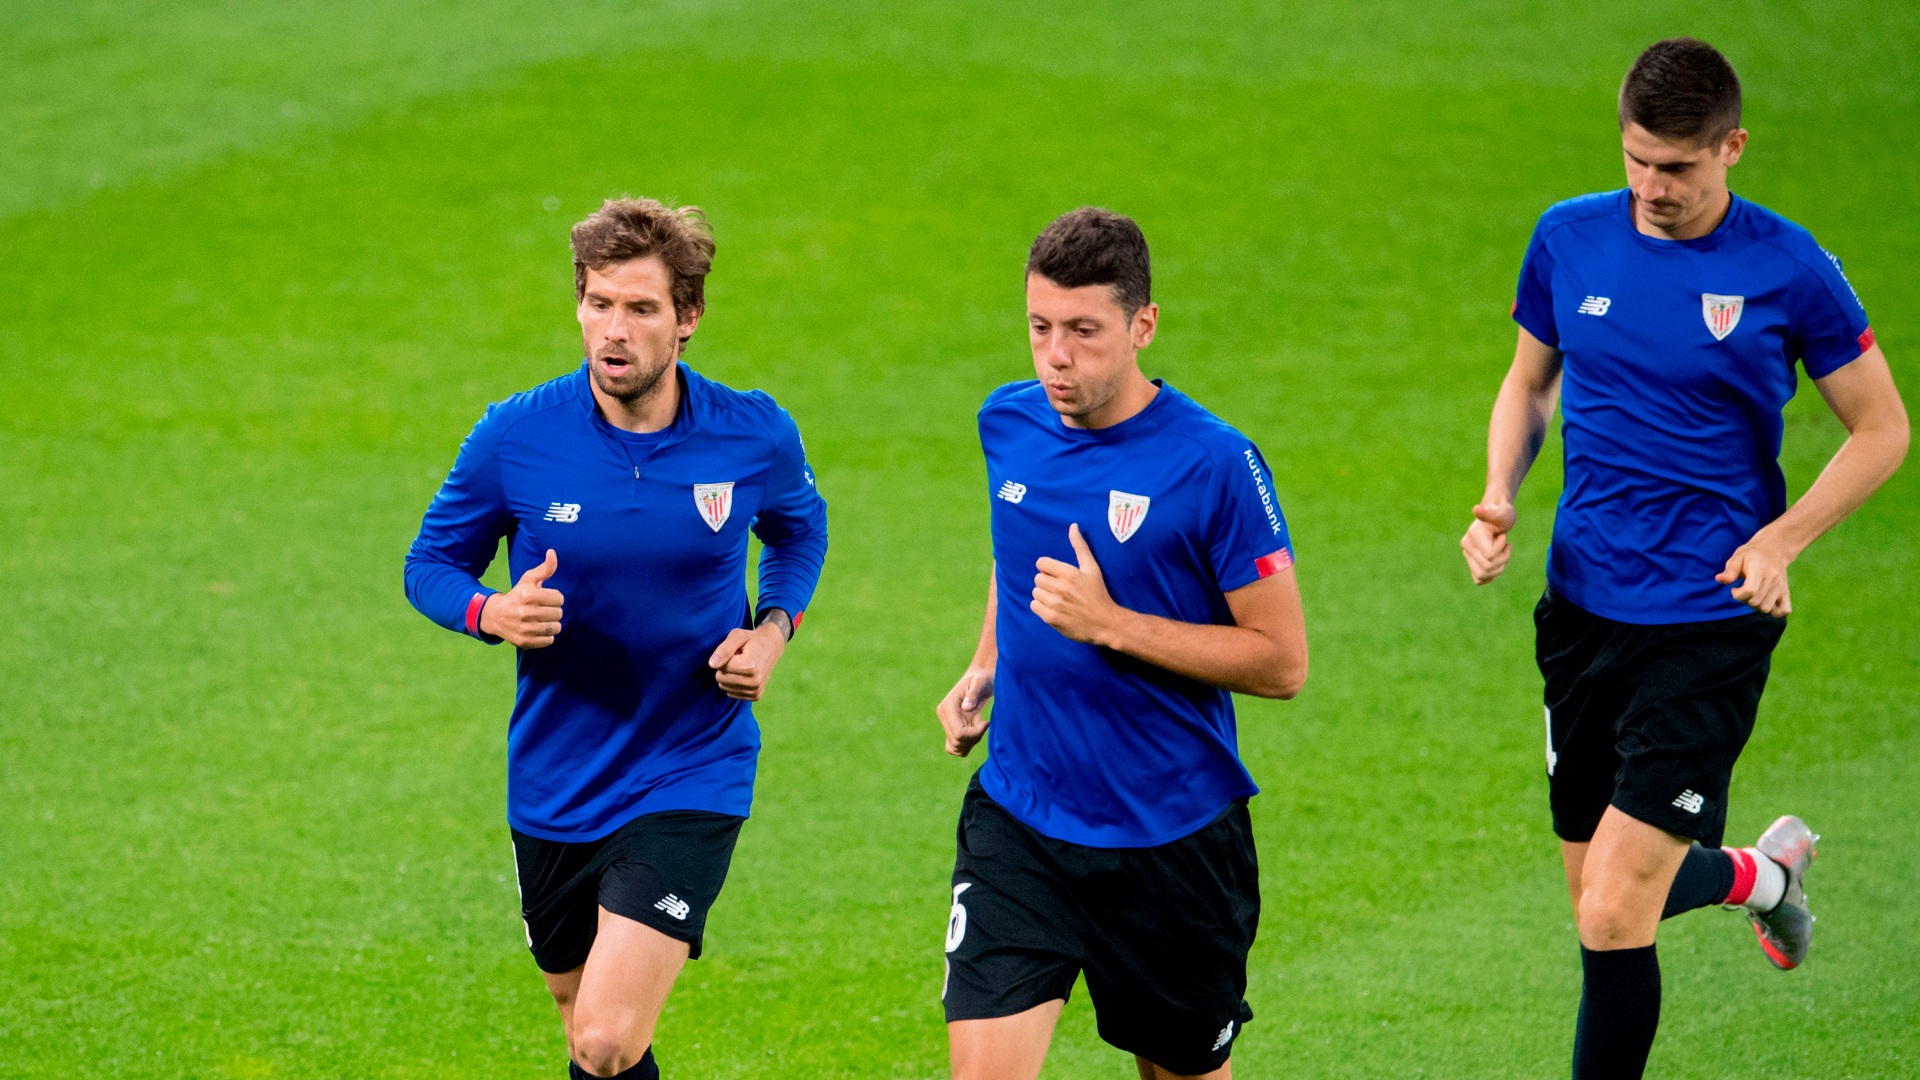 Confirmed lineups: Levante UD – Athletic Club